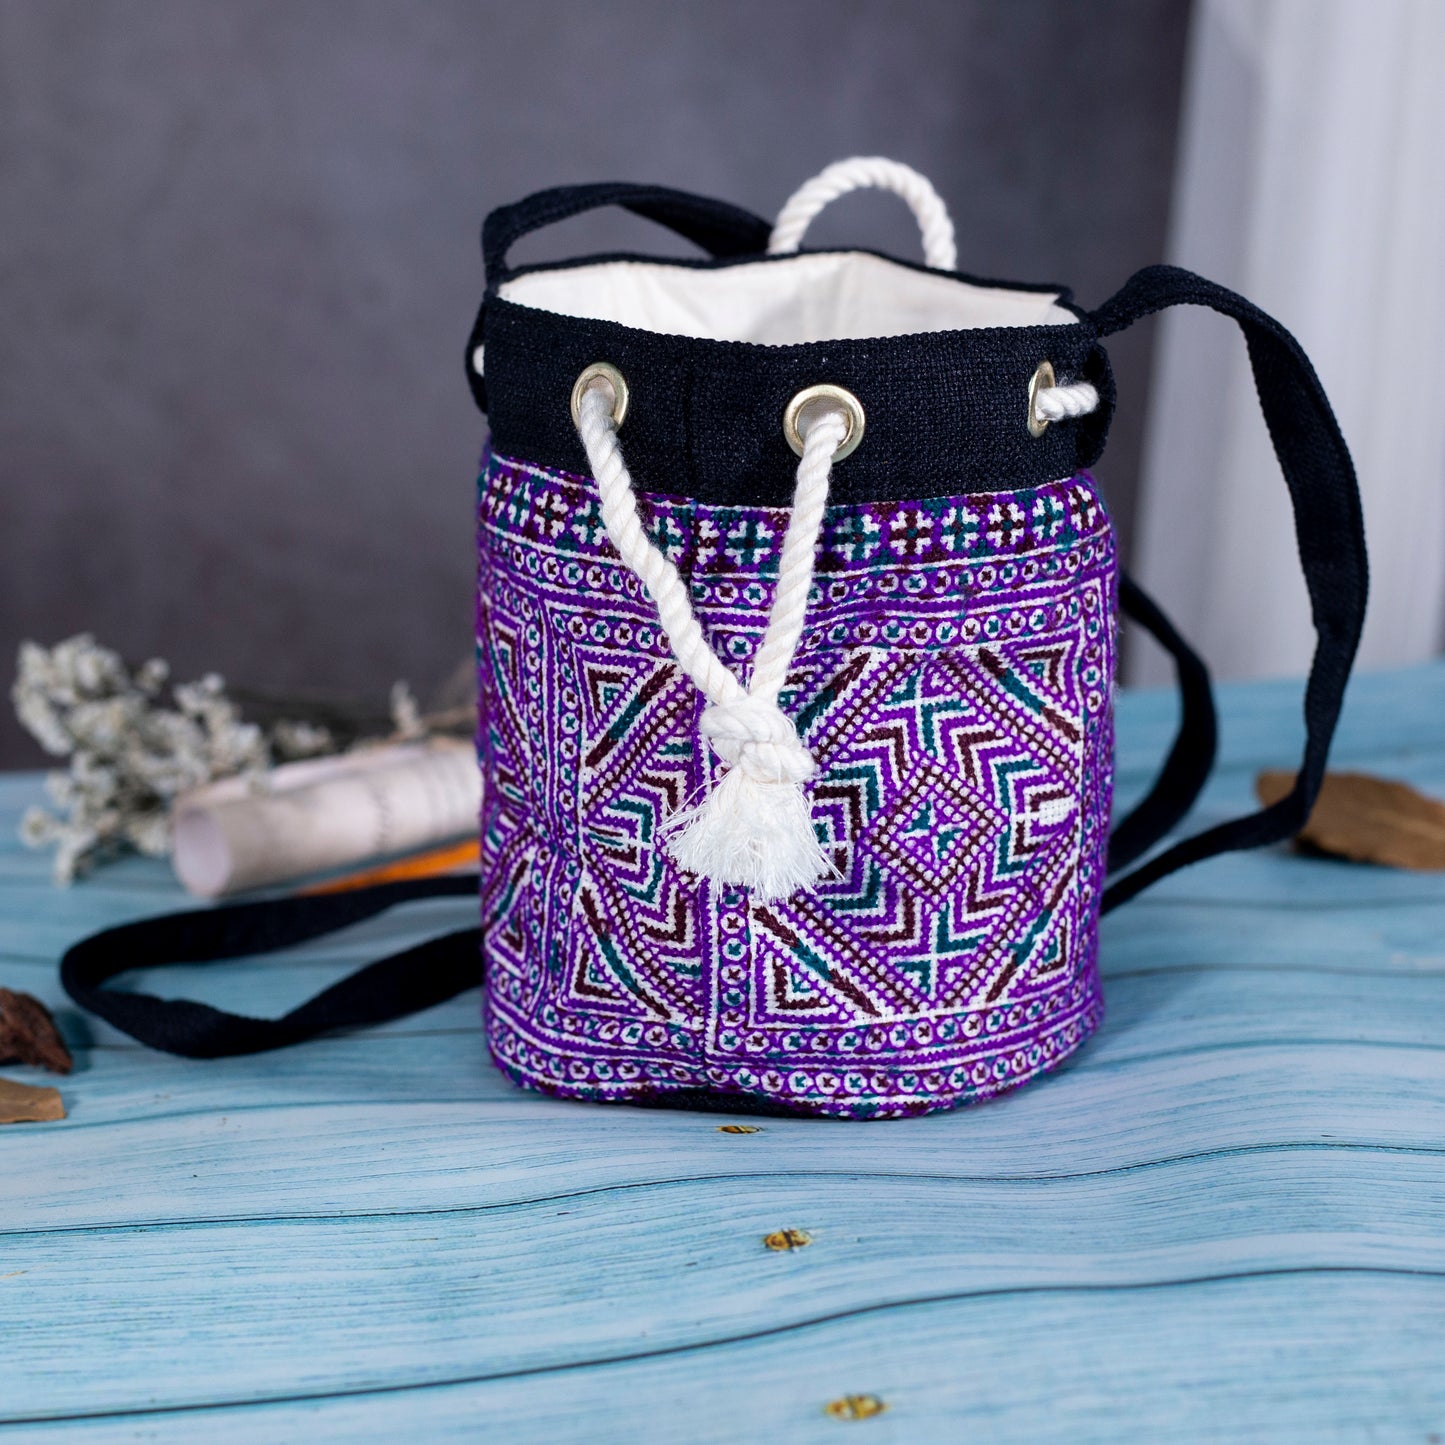 Mini cosmetic bag, purple embroidery, black string, can be used as cross-shoulder bag